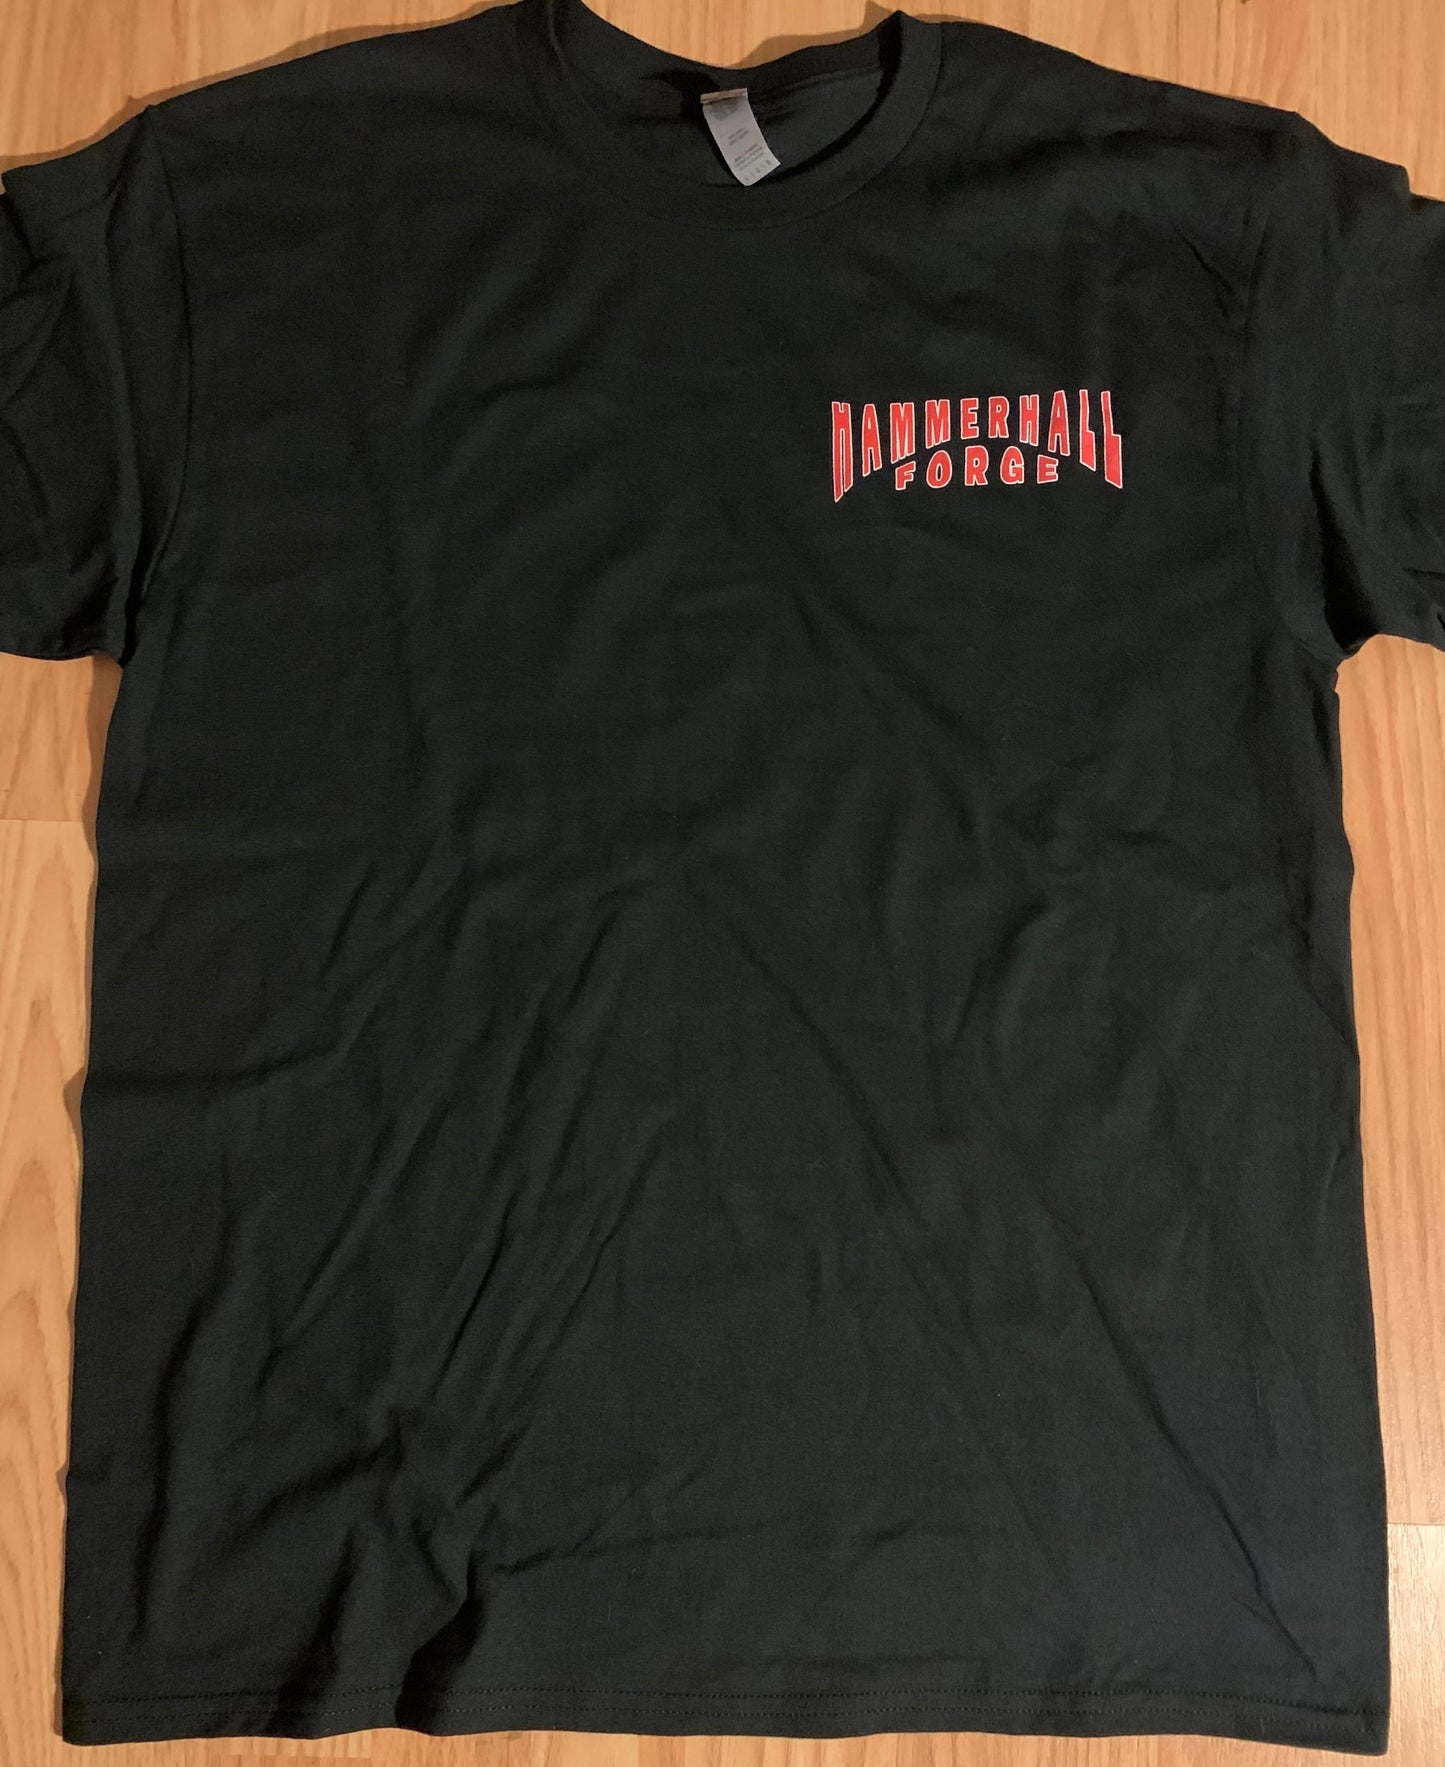 Hammerhall Forge T-shirt